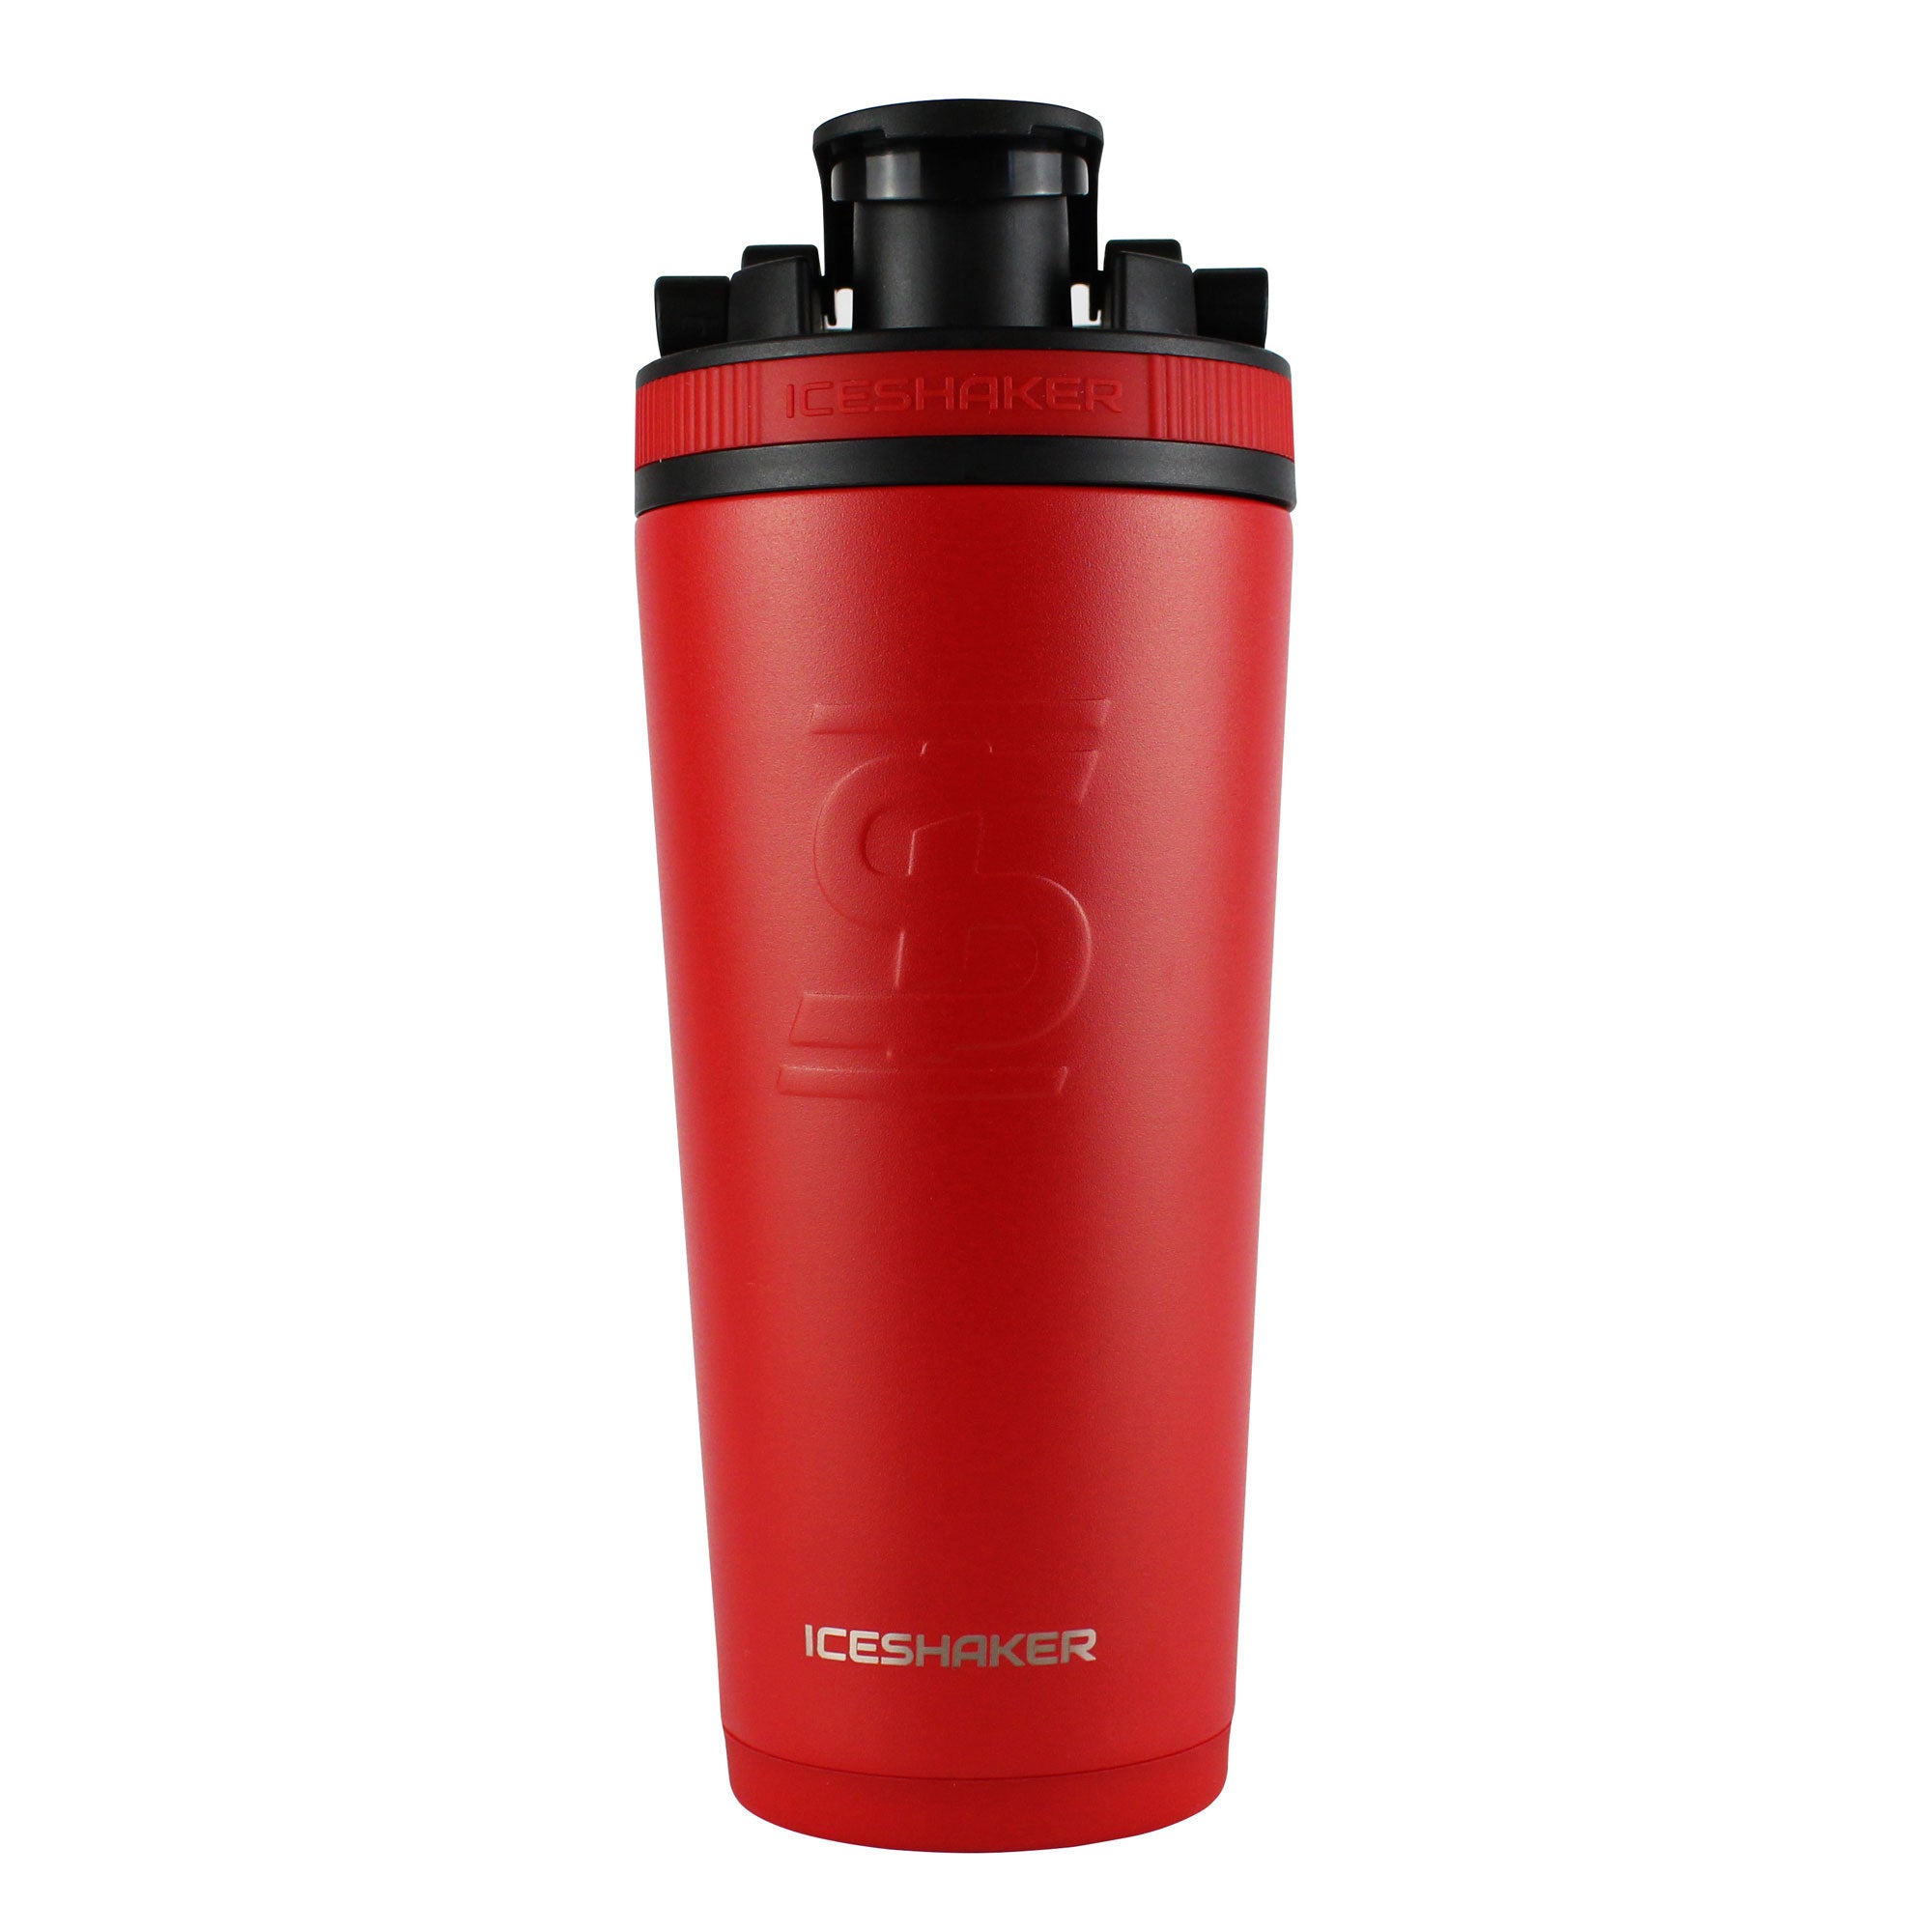 Gronk Signature Edition 26oz Ice Shaker - Red